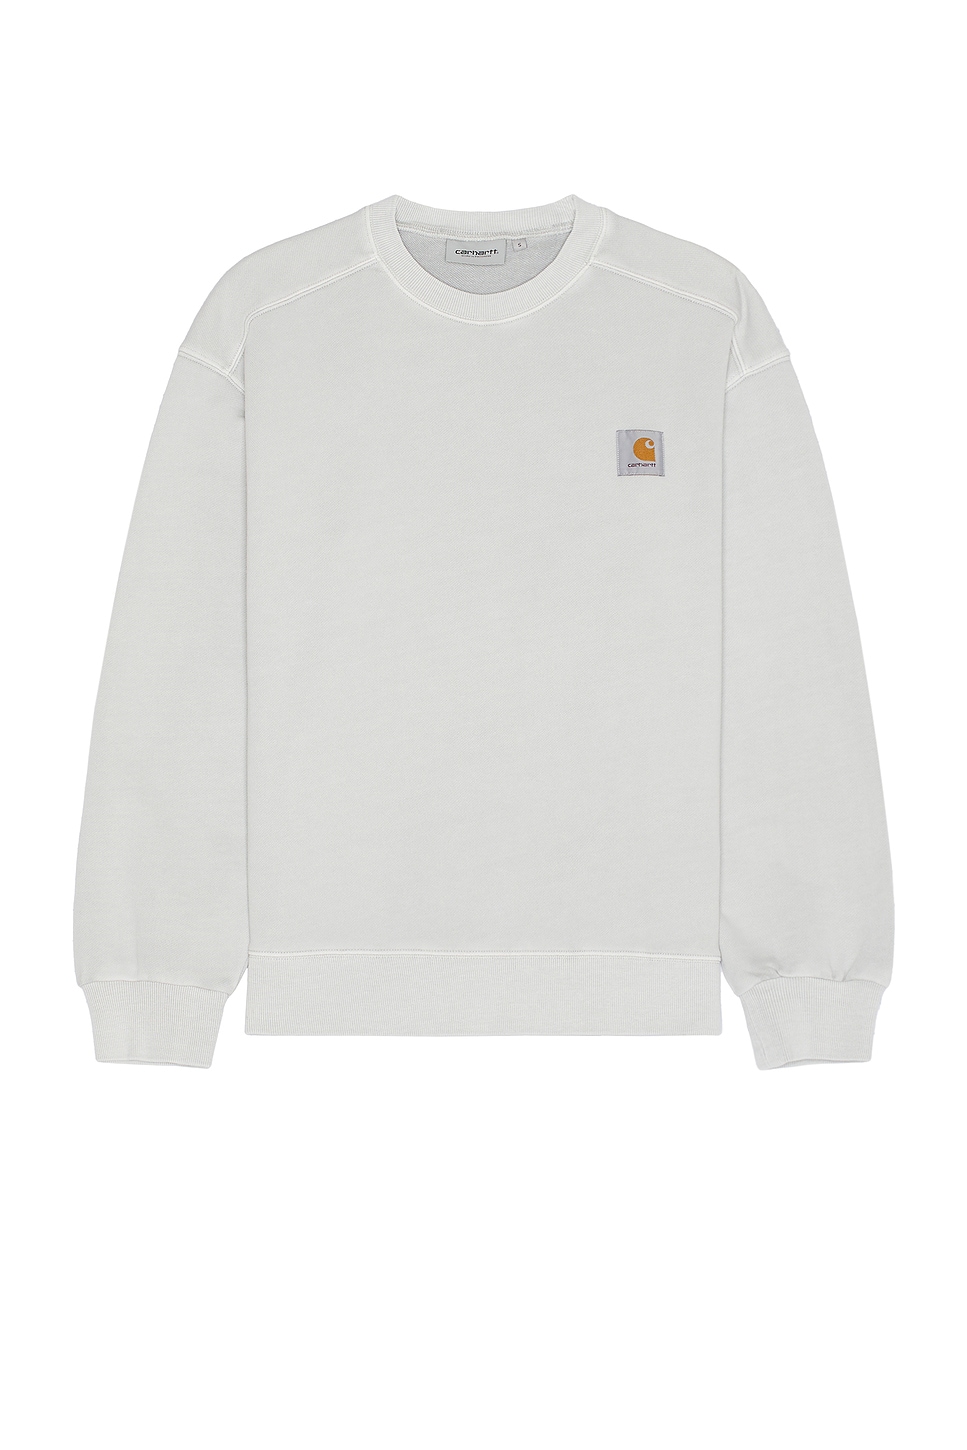 Image 1 of Carhartt WIP Nelson Sweater in Sonic Silver Garment Dyed